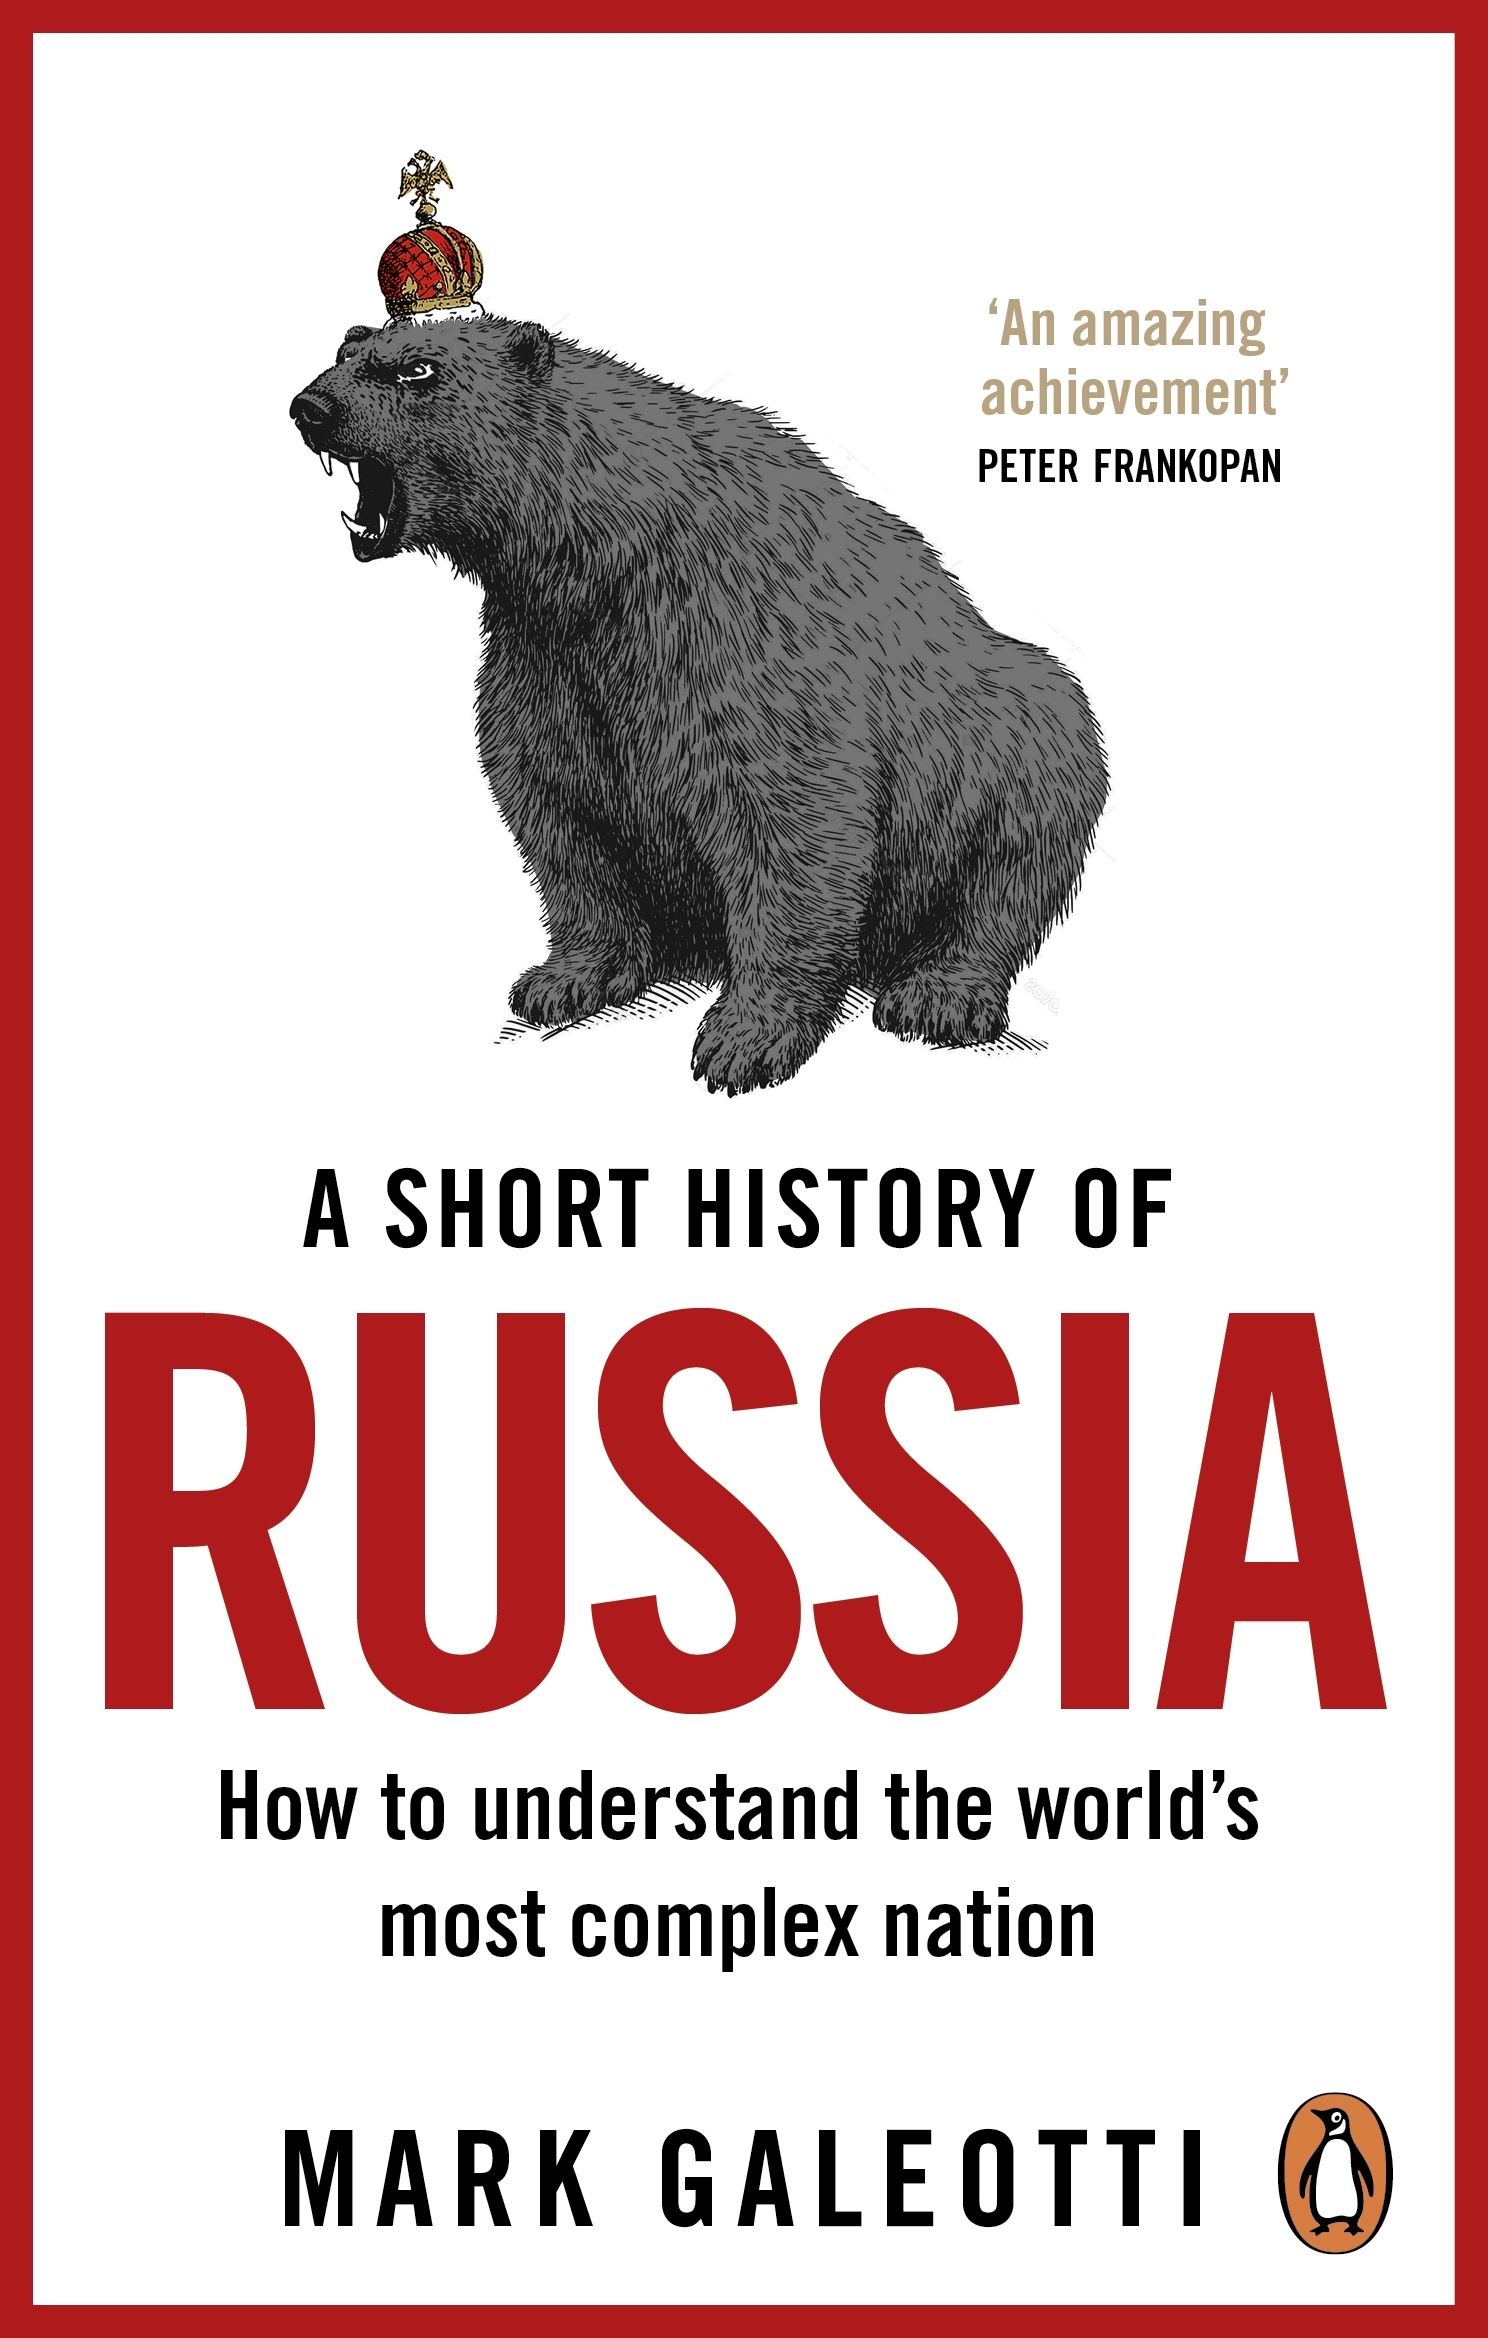 research about russia